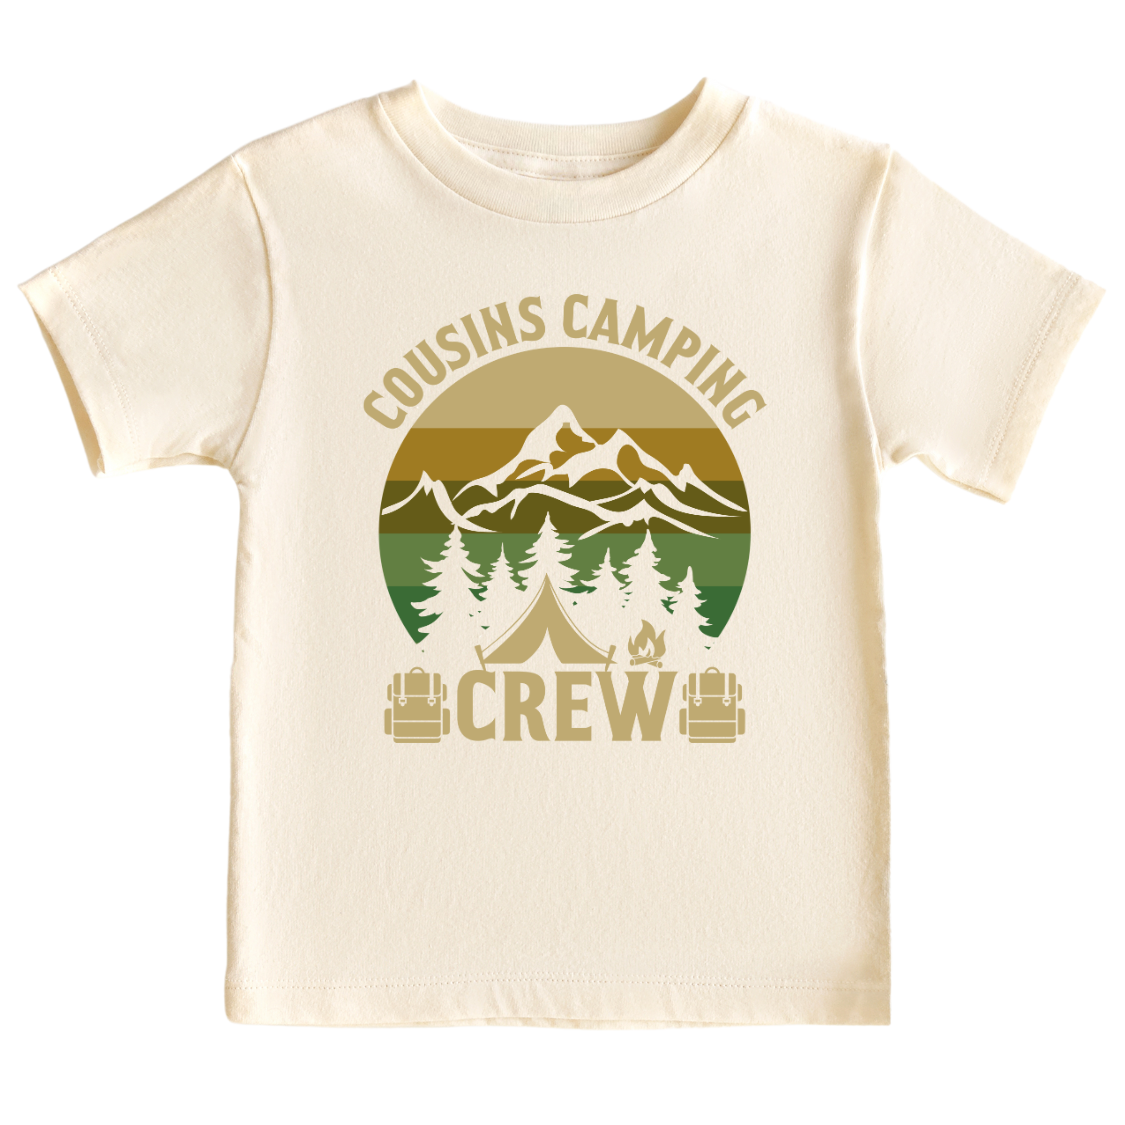 Natural Kid Tshirt with a camping-themed printed graphic and the text 'Camping Cousin Crew.' This adventurous design celebrates the bond of cousins on camping trips. 